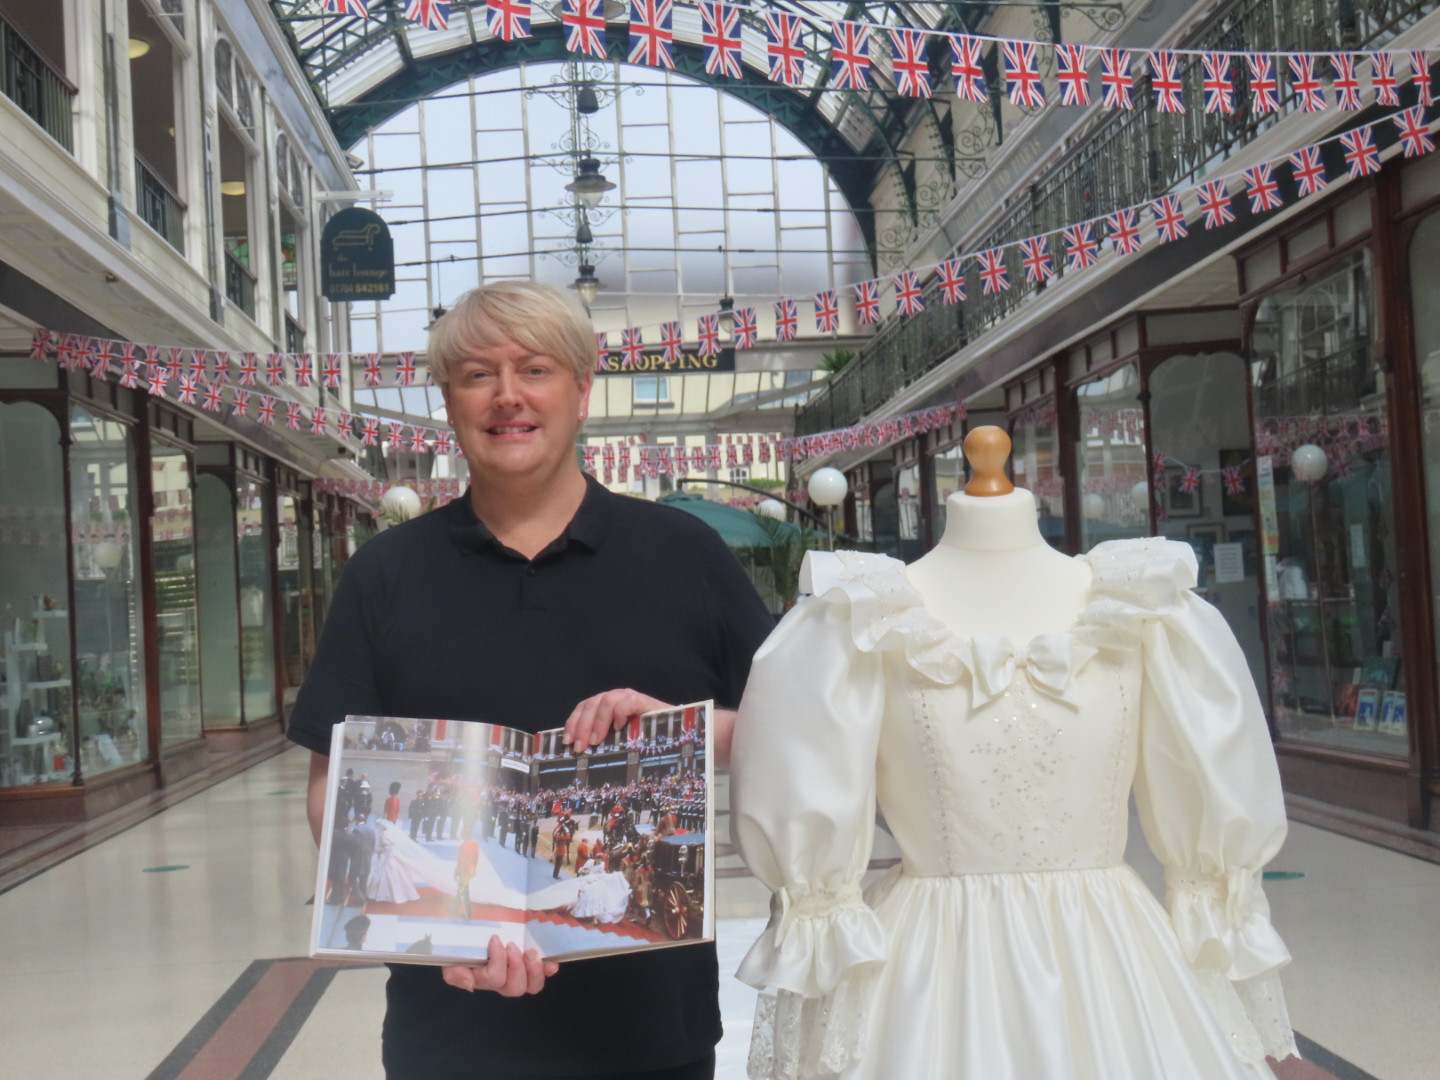 Wayfarers Arcade in Southport town centre has announced the centrepiece of its Jubilee Fashion Exhibition is to be an exact copy of Diana Princess of Wales wedding dress when she married Prince Charles on 29 July 1981, created by Mark Lyon-Taylor. Photo by Andrew Brown Media